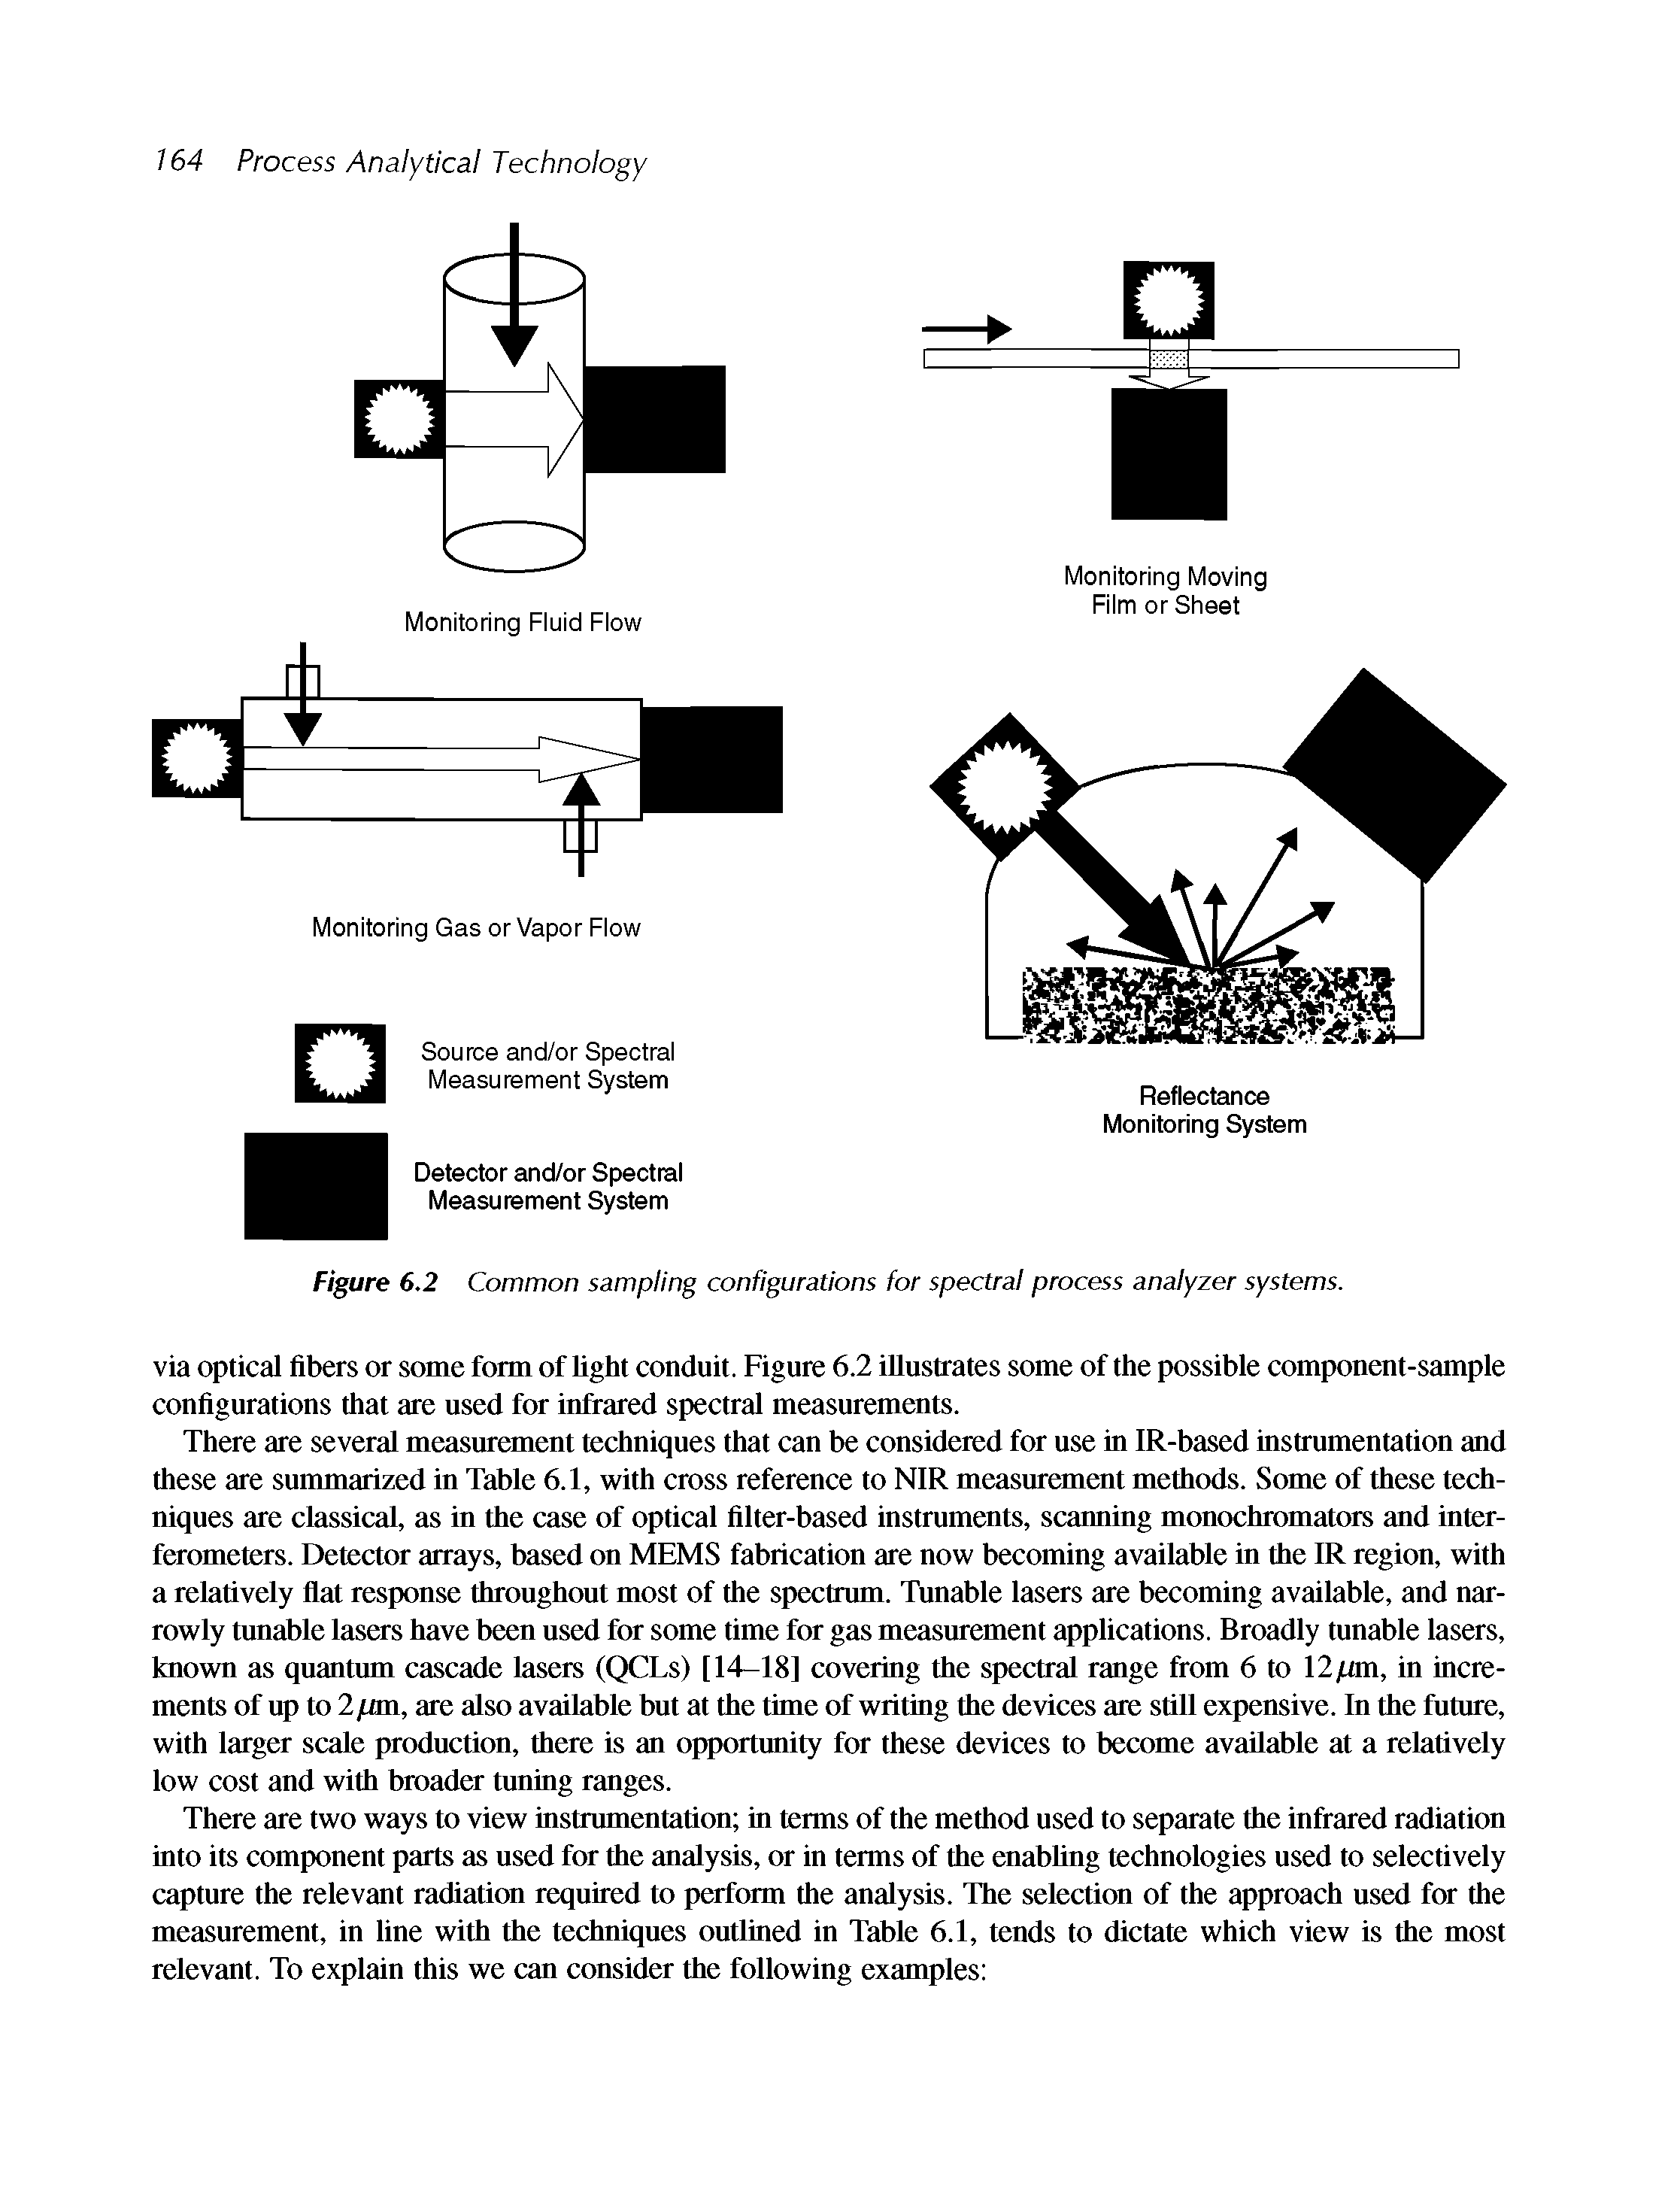 Figure 6.2 Common sampling configurations for spectral process analyzer systems.